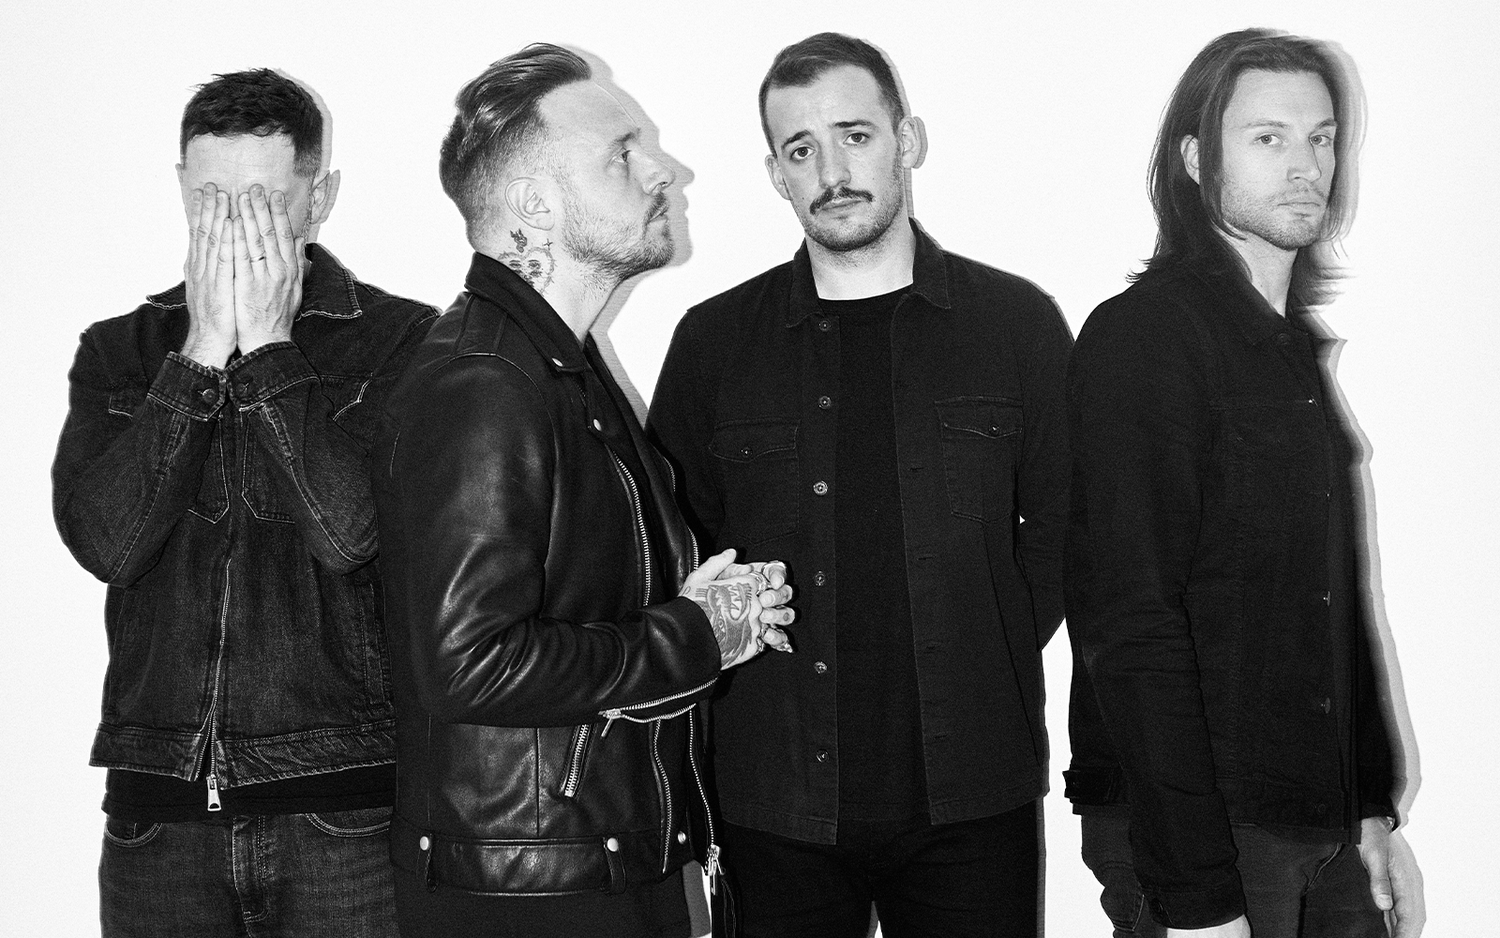 Architects Debut Furious New Single, "Seeing Red" Along With North American Tour Dates